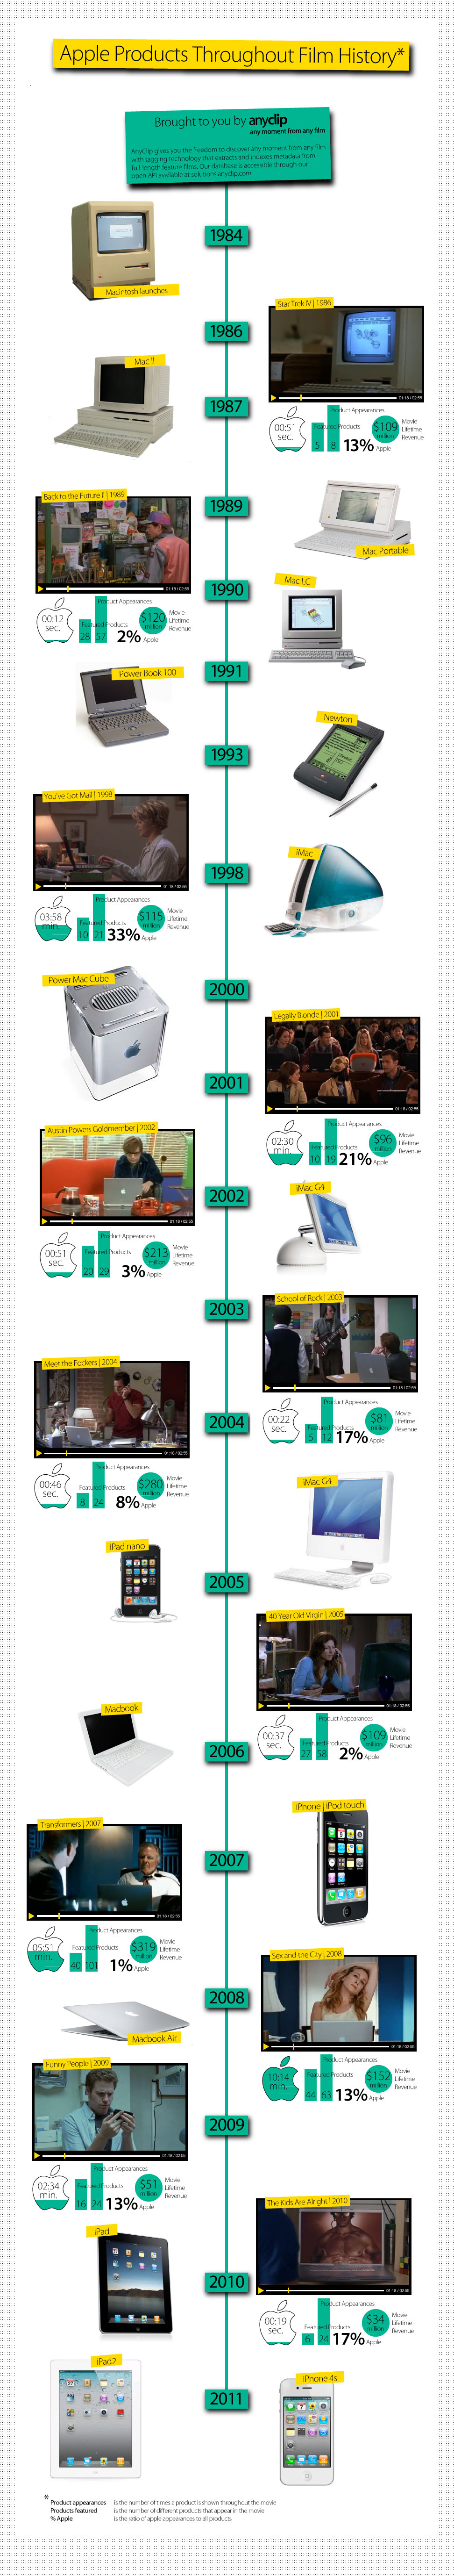 Apple In Movies: Time On Screen Historic Timeline [Infographic]